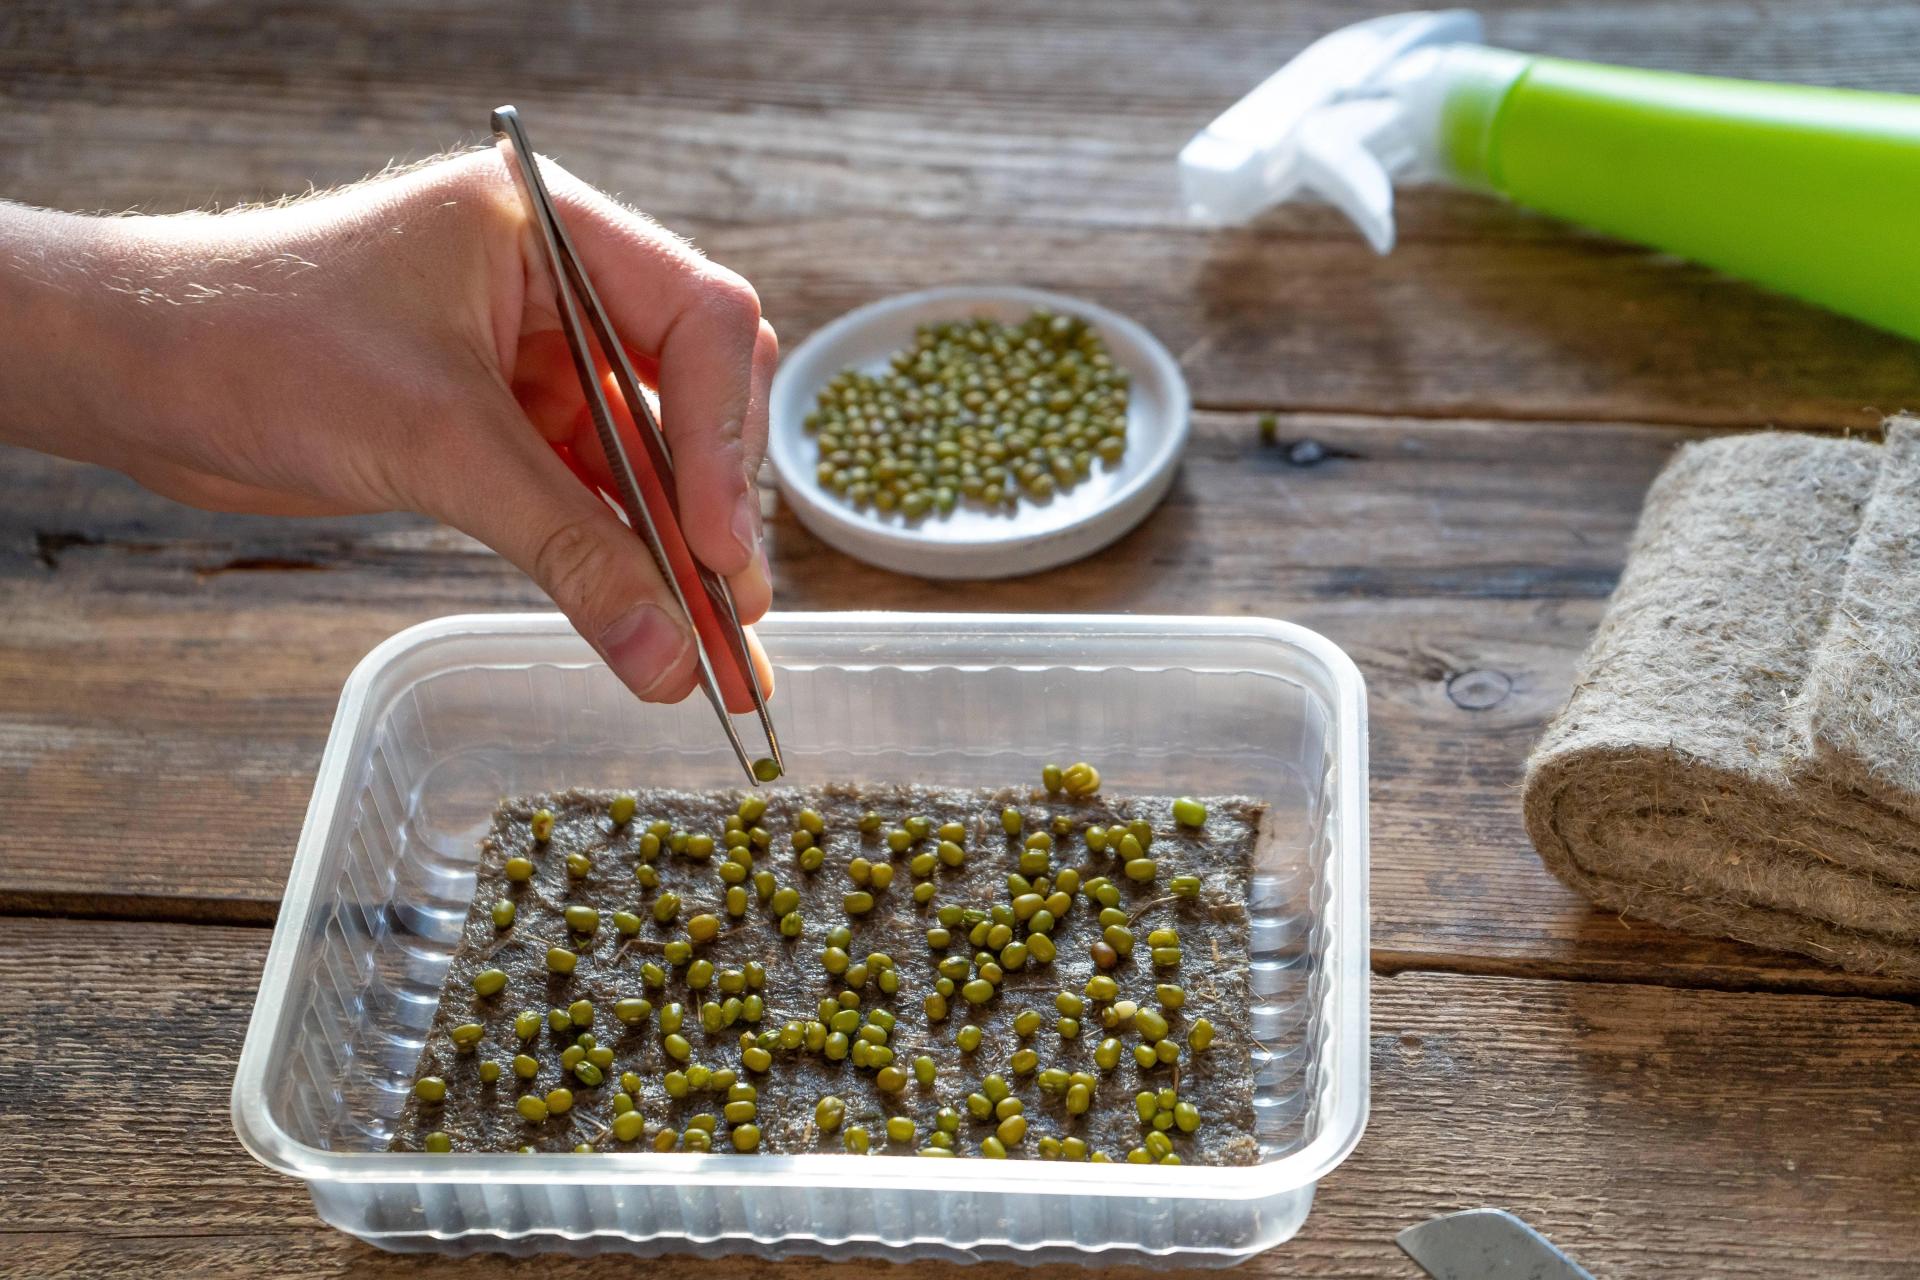 Germinating Seeds in a Container